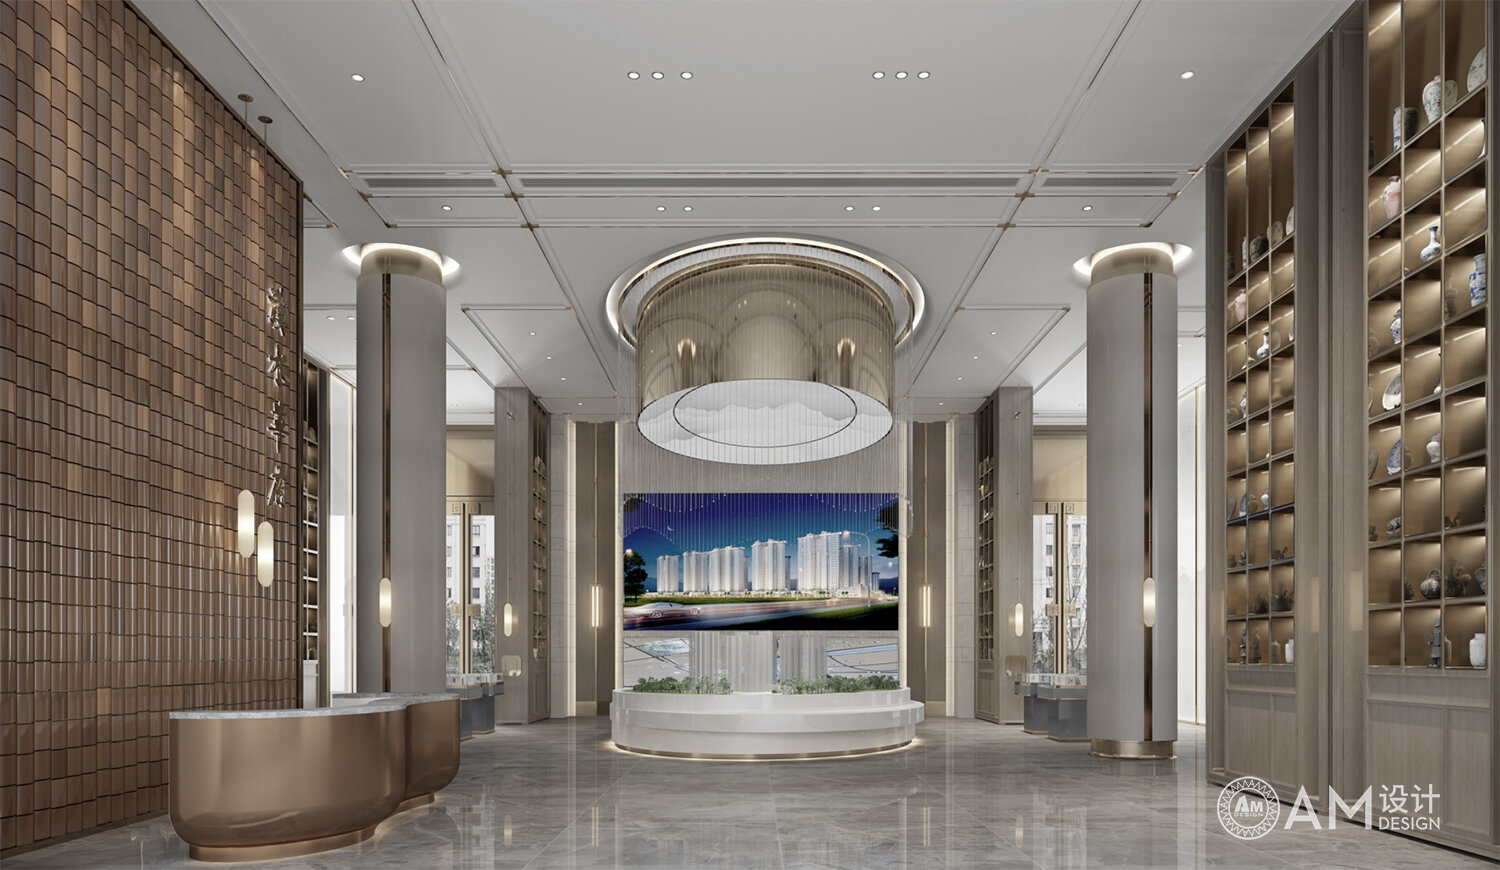 AM DESIGN | Design of the lobby of the sales office of Hanshui Huafu, Shaanxi